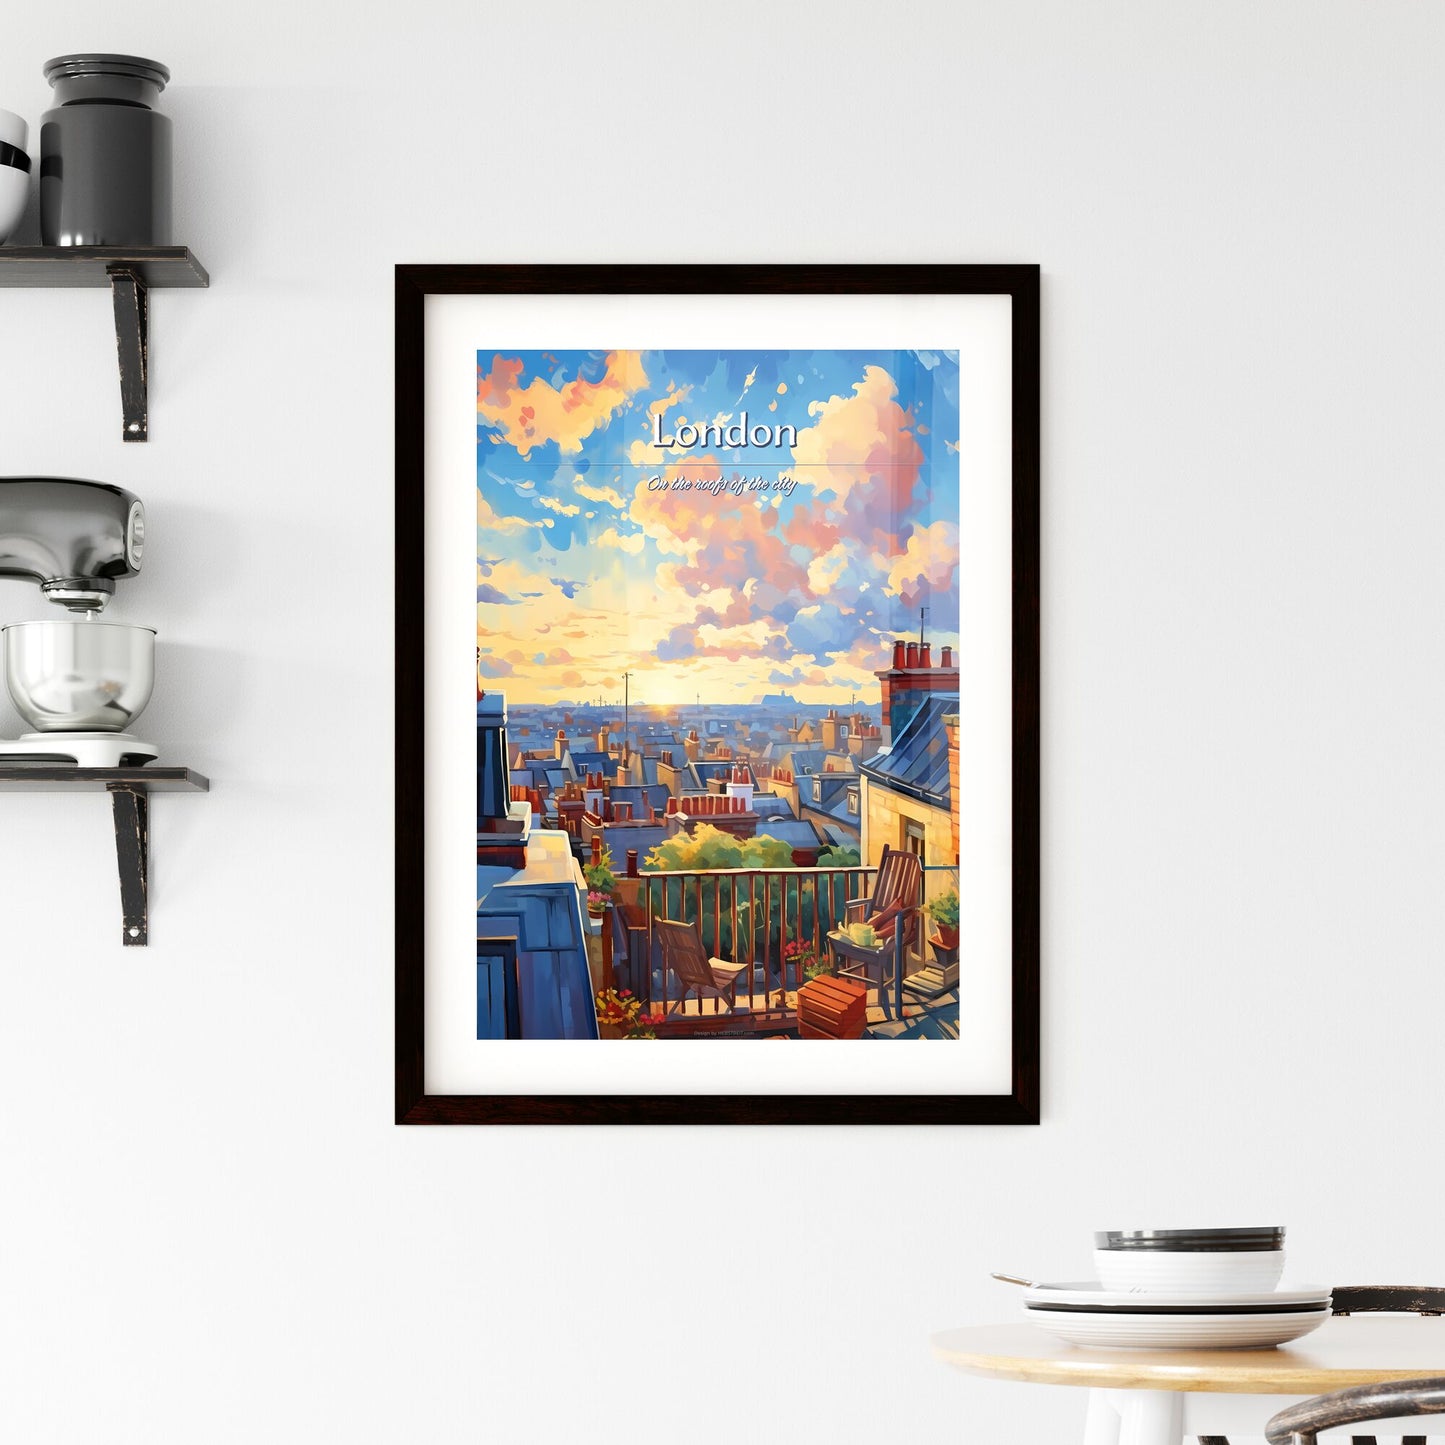 On the roofs of London, UK - Art print of a rooftops of a city Default Title